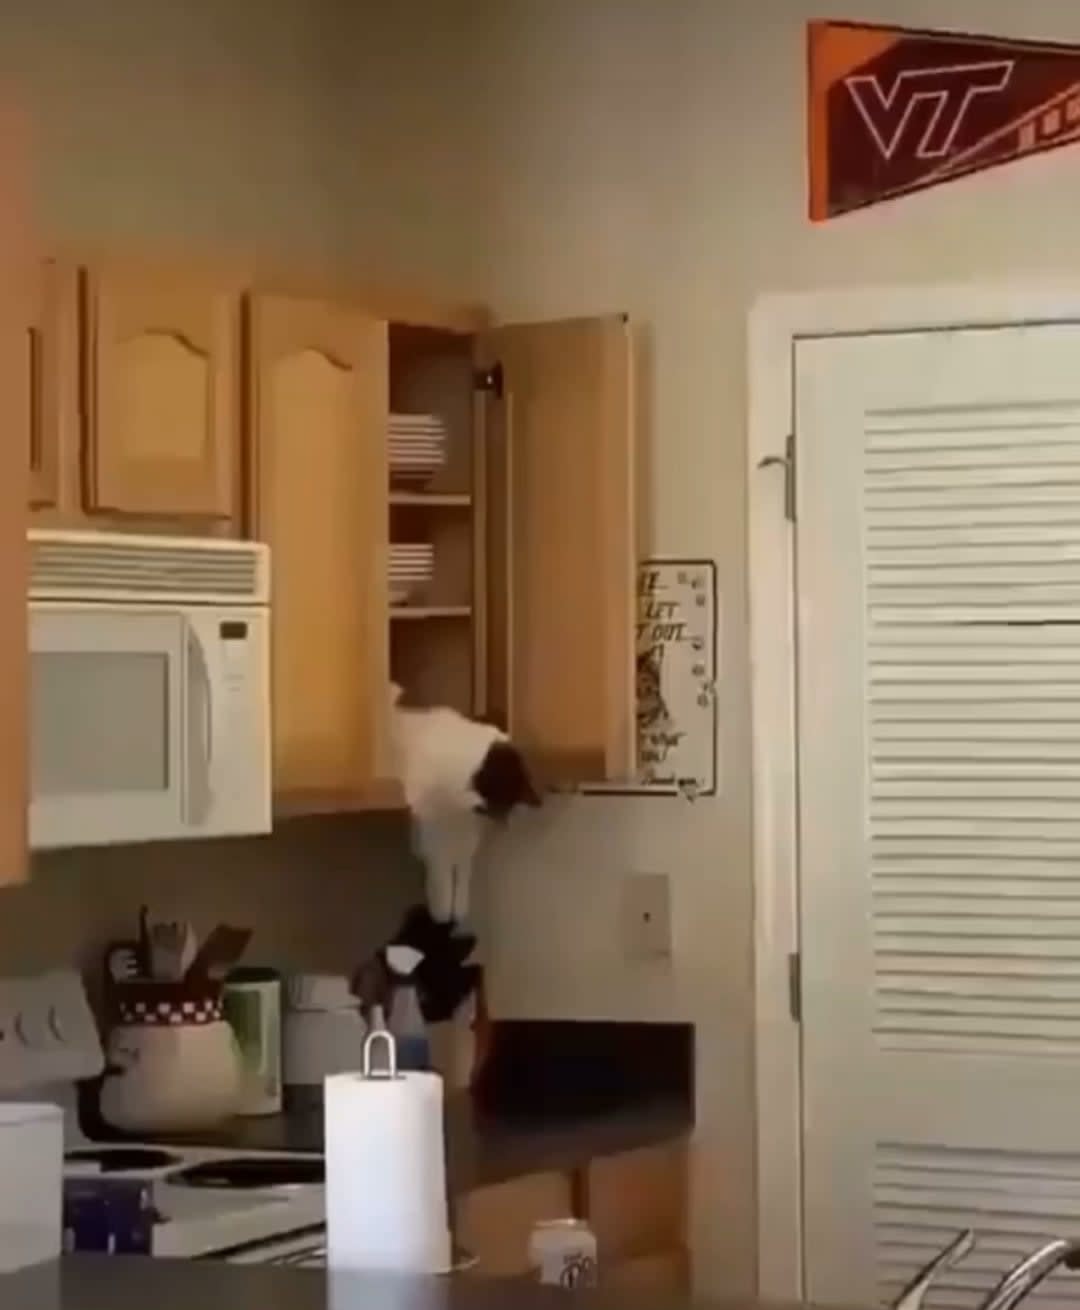 Cat taps knives; watch out hoomans